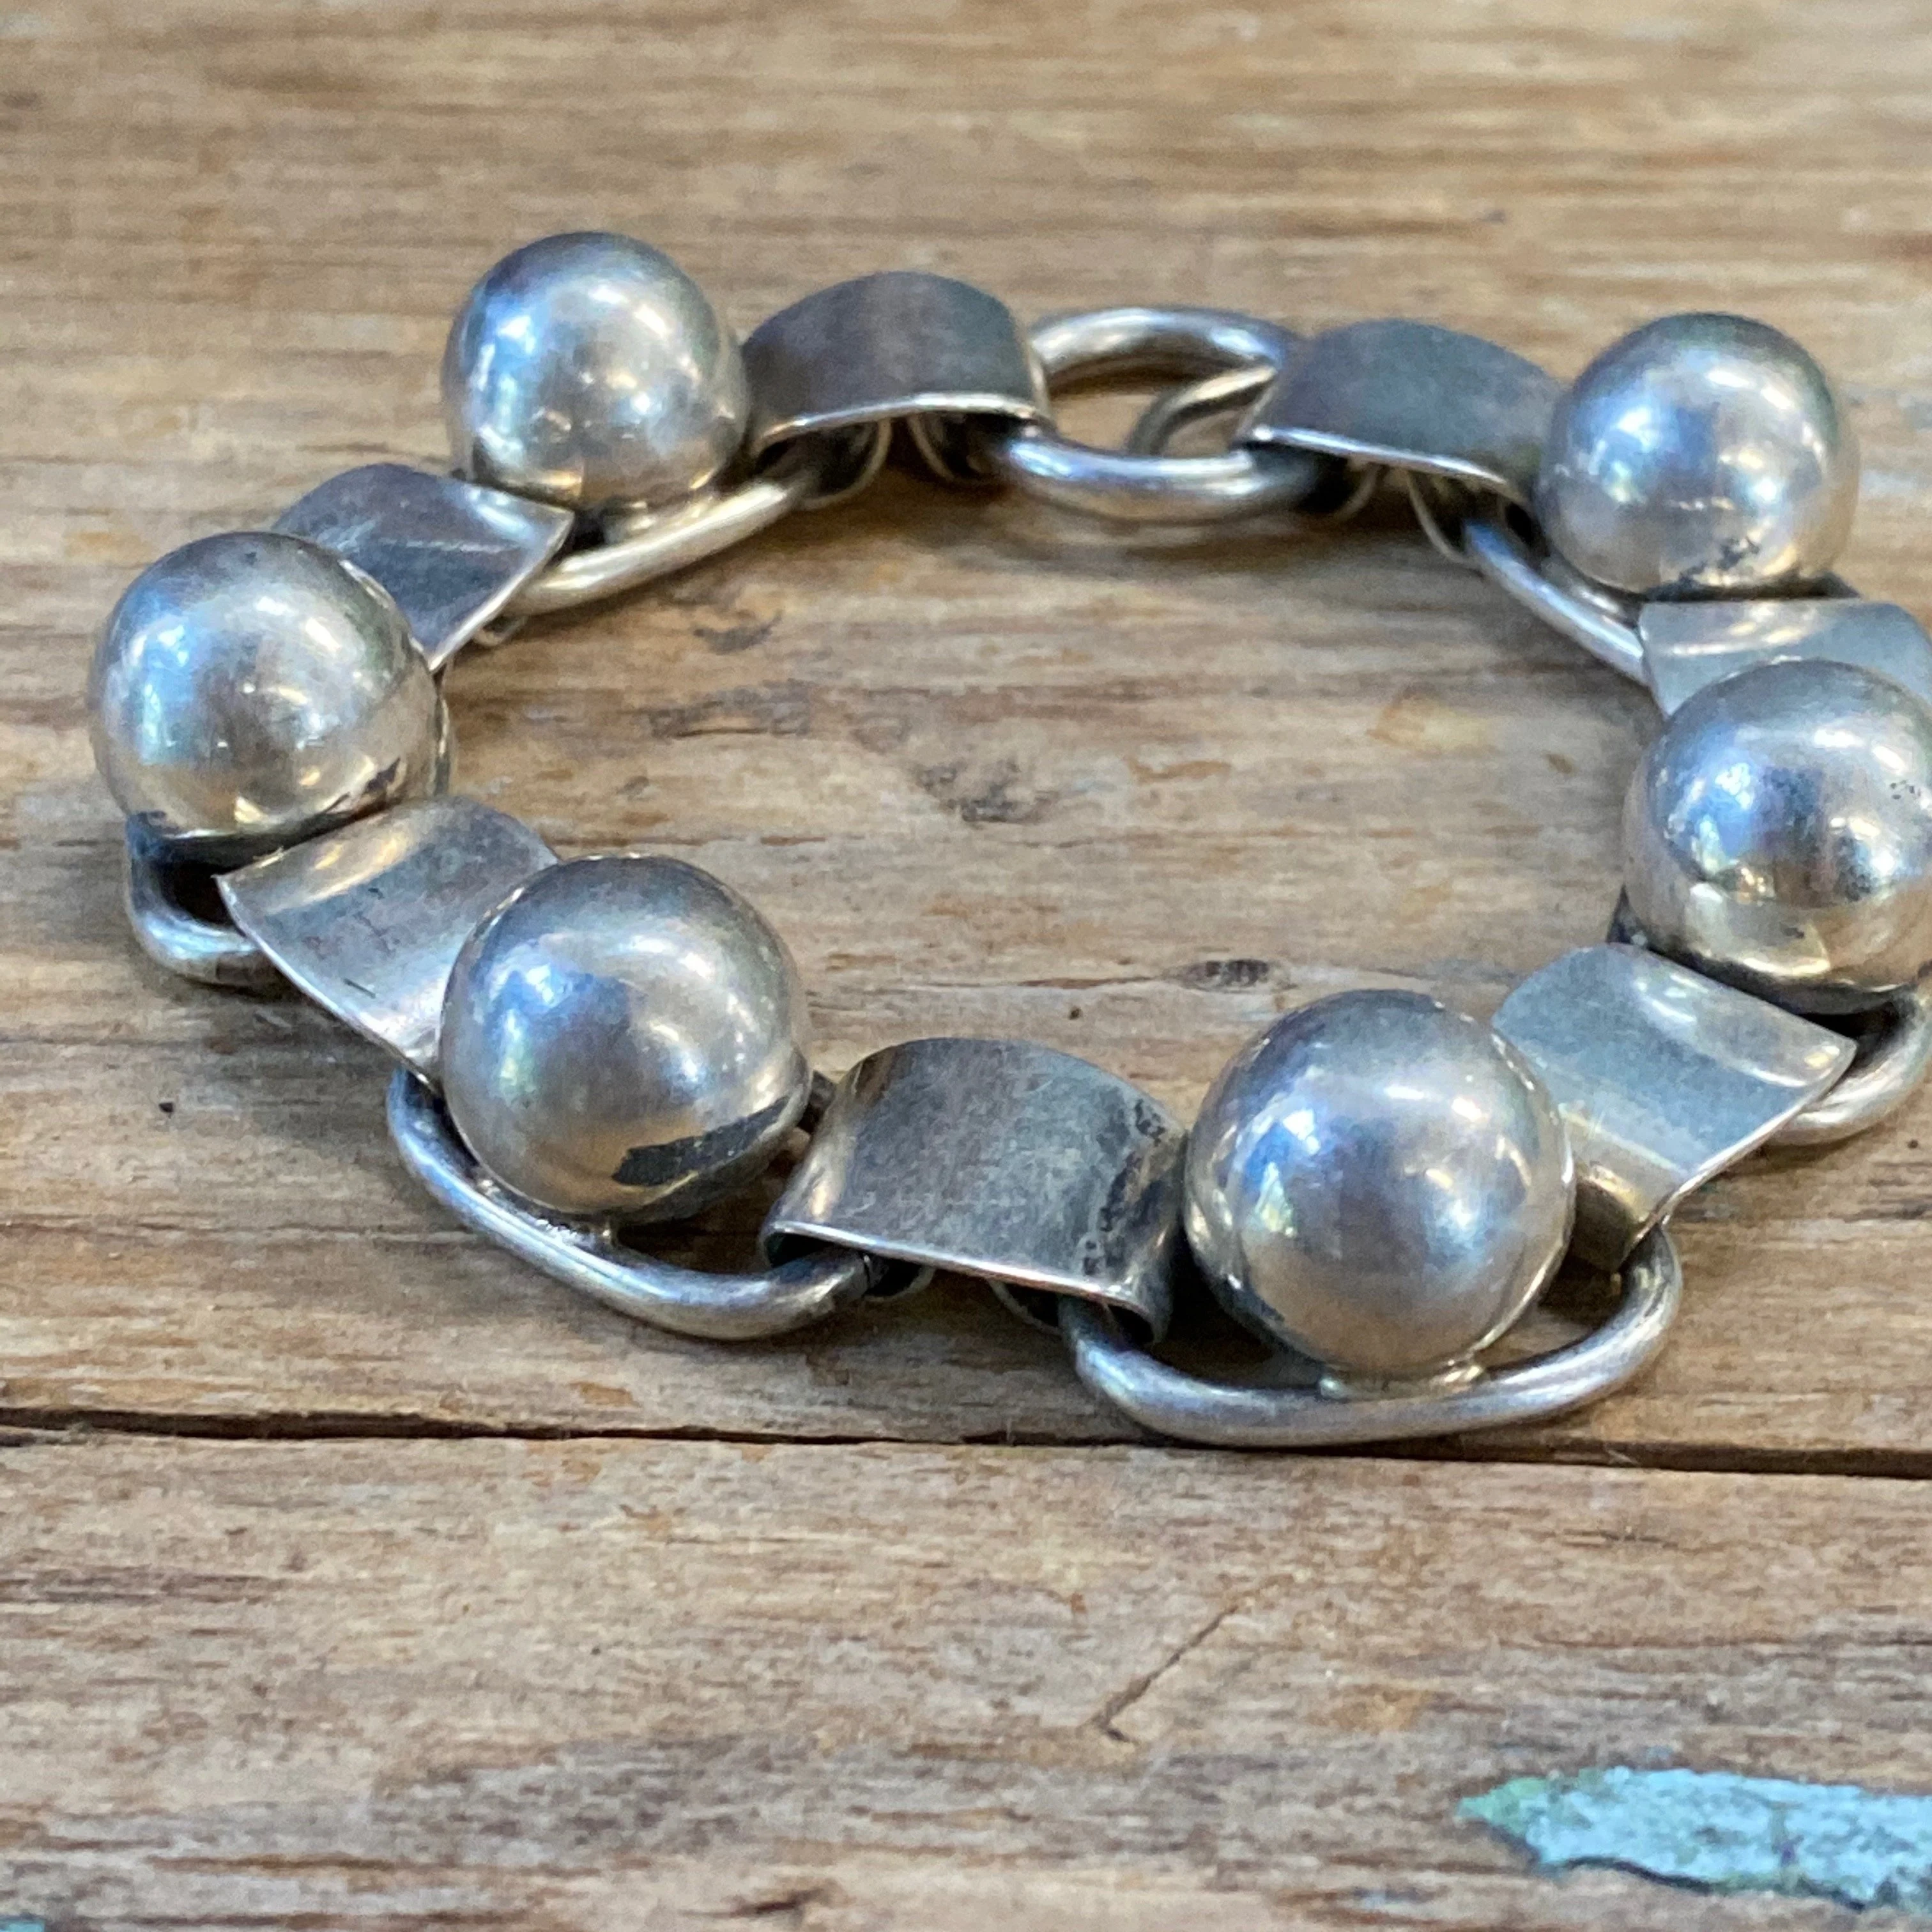 Napier Bookchain and Orb Bracelet in Sterling Silver 1930s